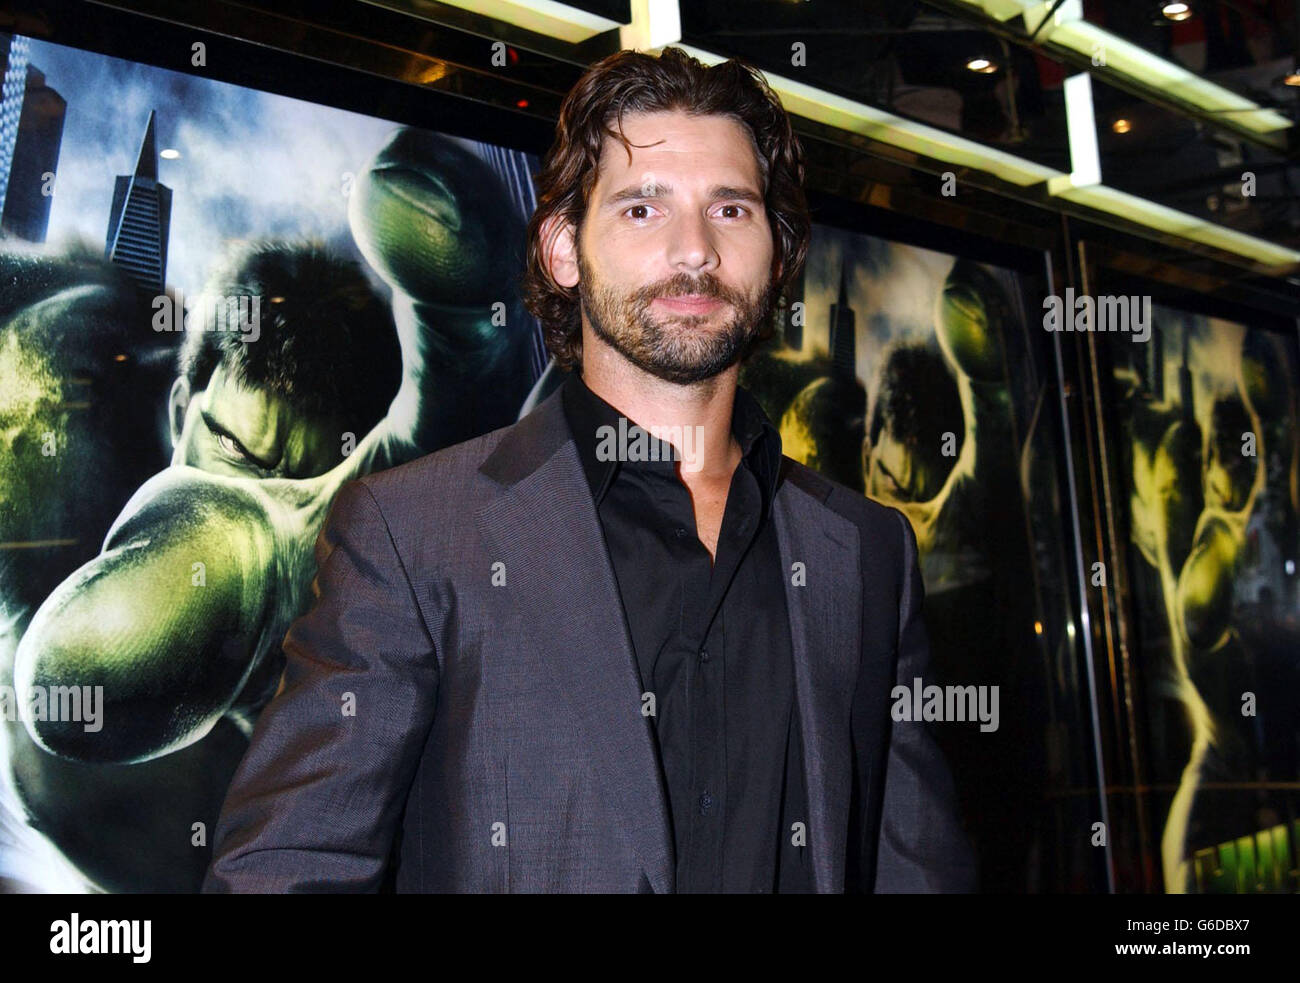 Eric Bana who plays the Hulk arrive at the premiere of 'The Hulk' at the Empire cinema in London's Leicester Square. Stock Photo